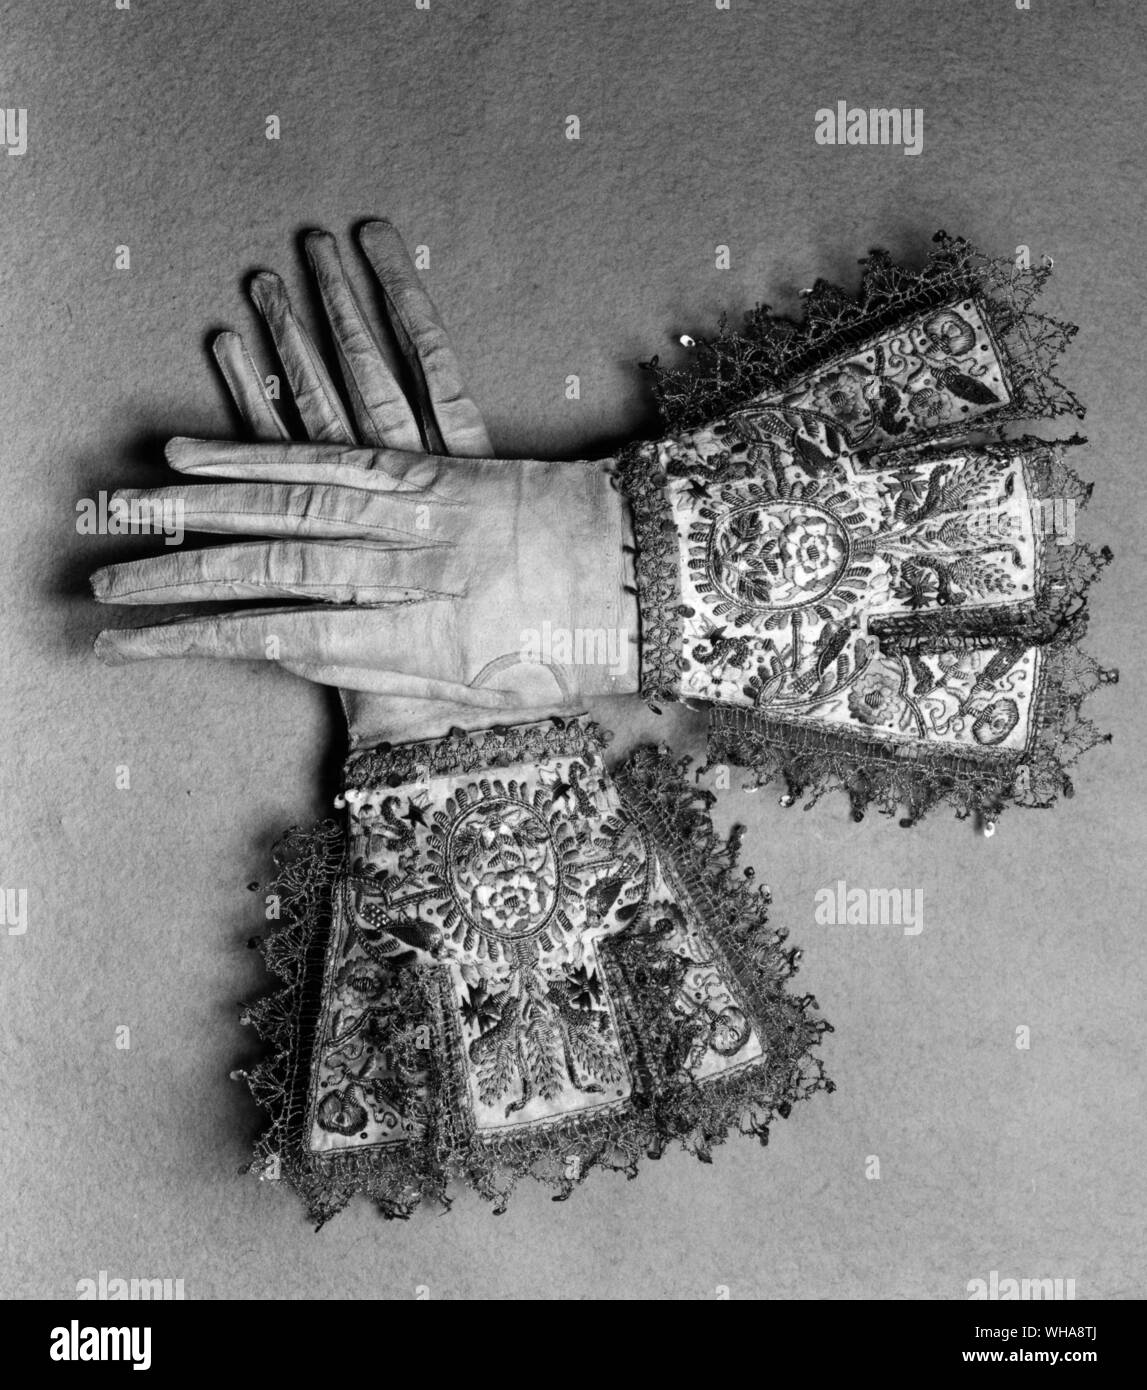 Pair of gloves. leather trimmed with satin and embroidered with silver and silver gilt thread metal ship and coloured silks. Trimmed with gold bobbin lace. c 1700 Stock Photo